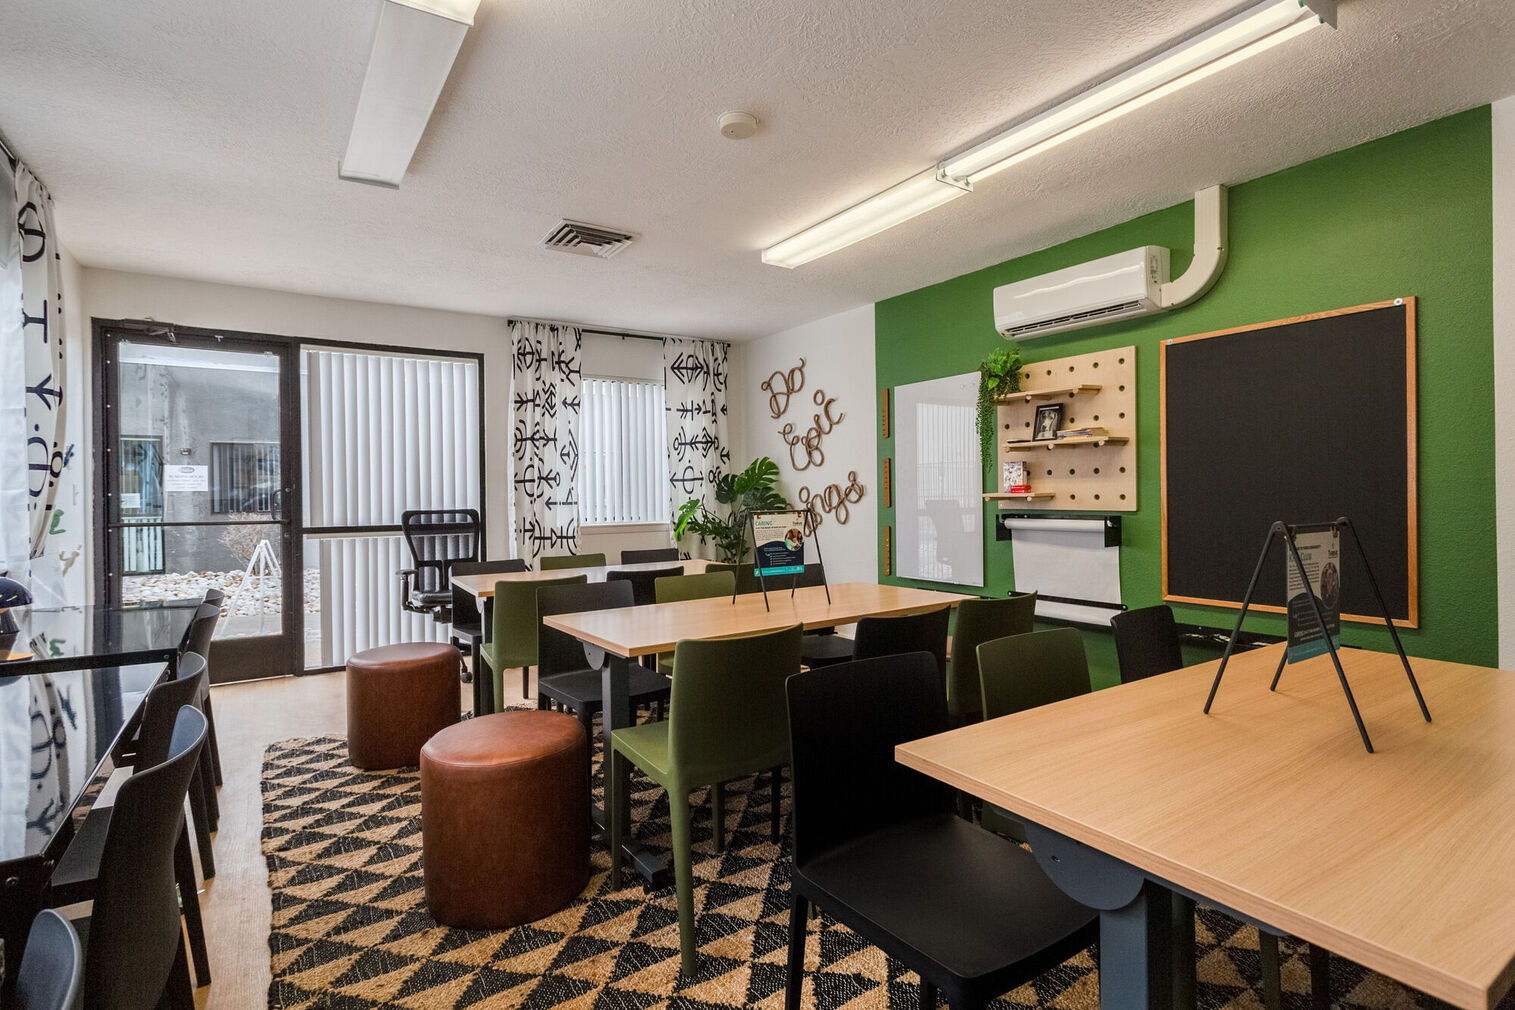 Kids club with desks and chairs, large windows, and shelves with books and games